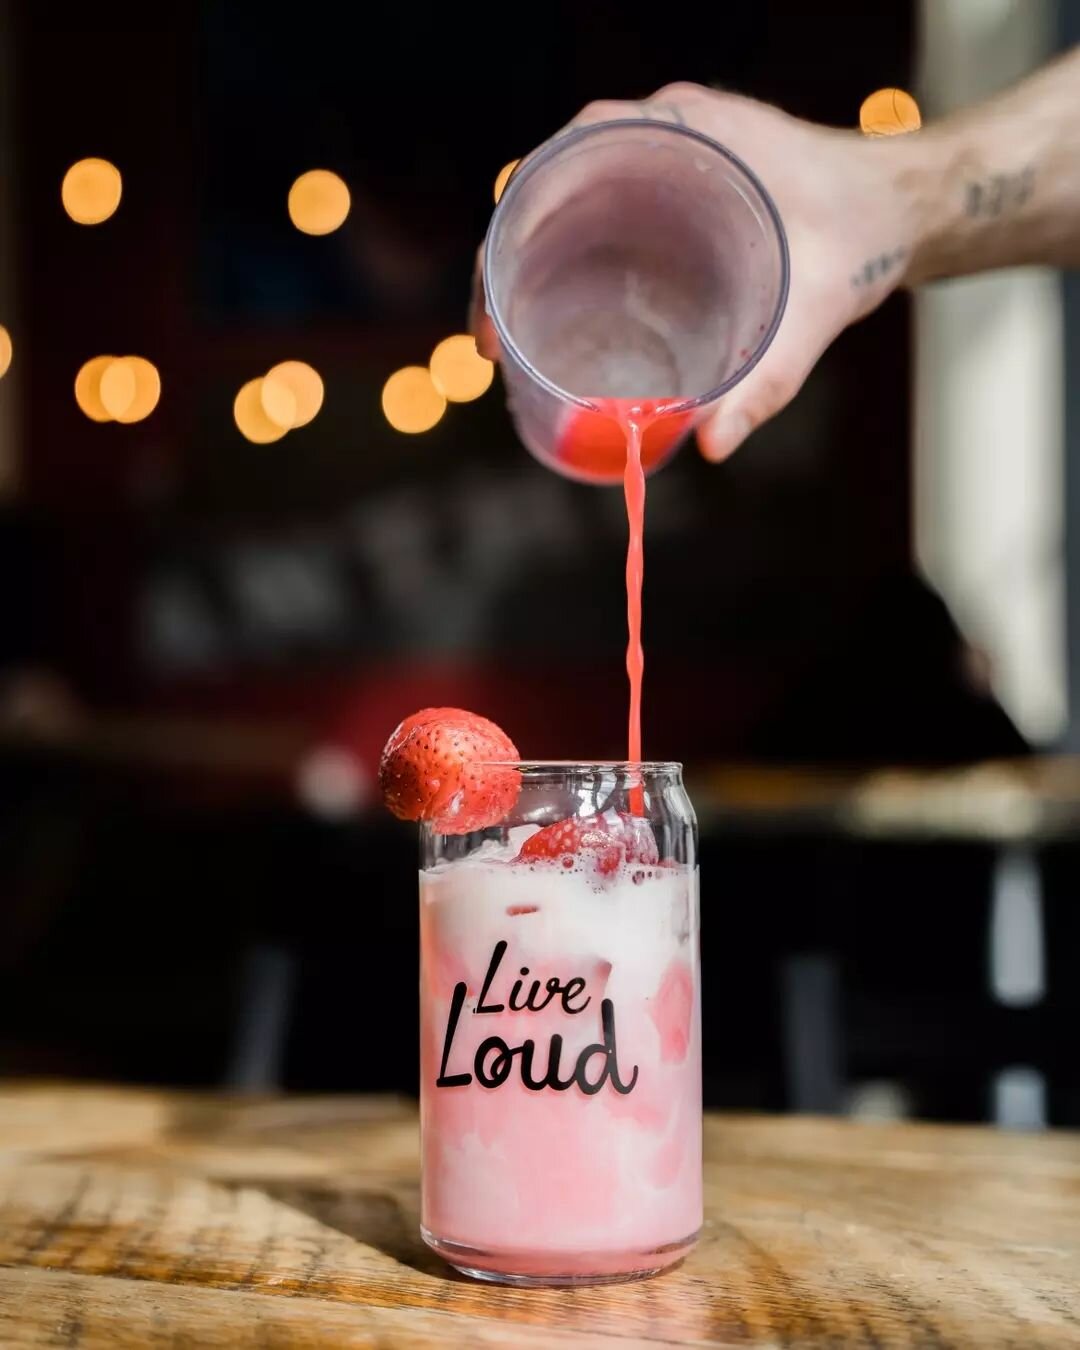 When art and science meet.&nbsp;🍓

What's the wildest drink you've ordered lately?